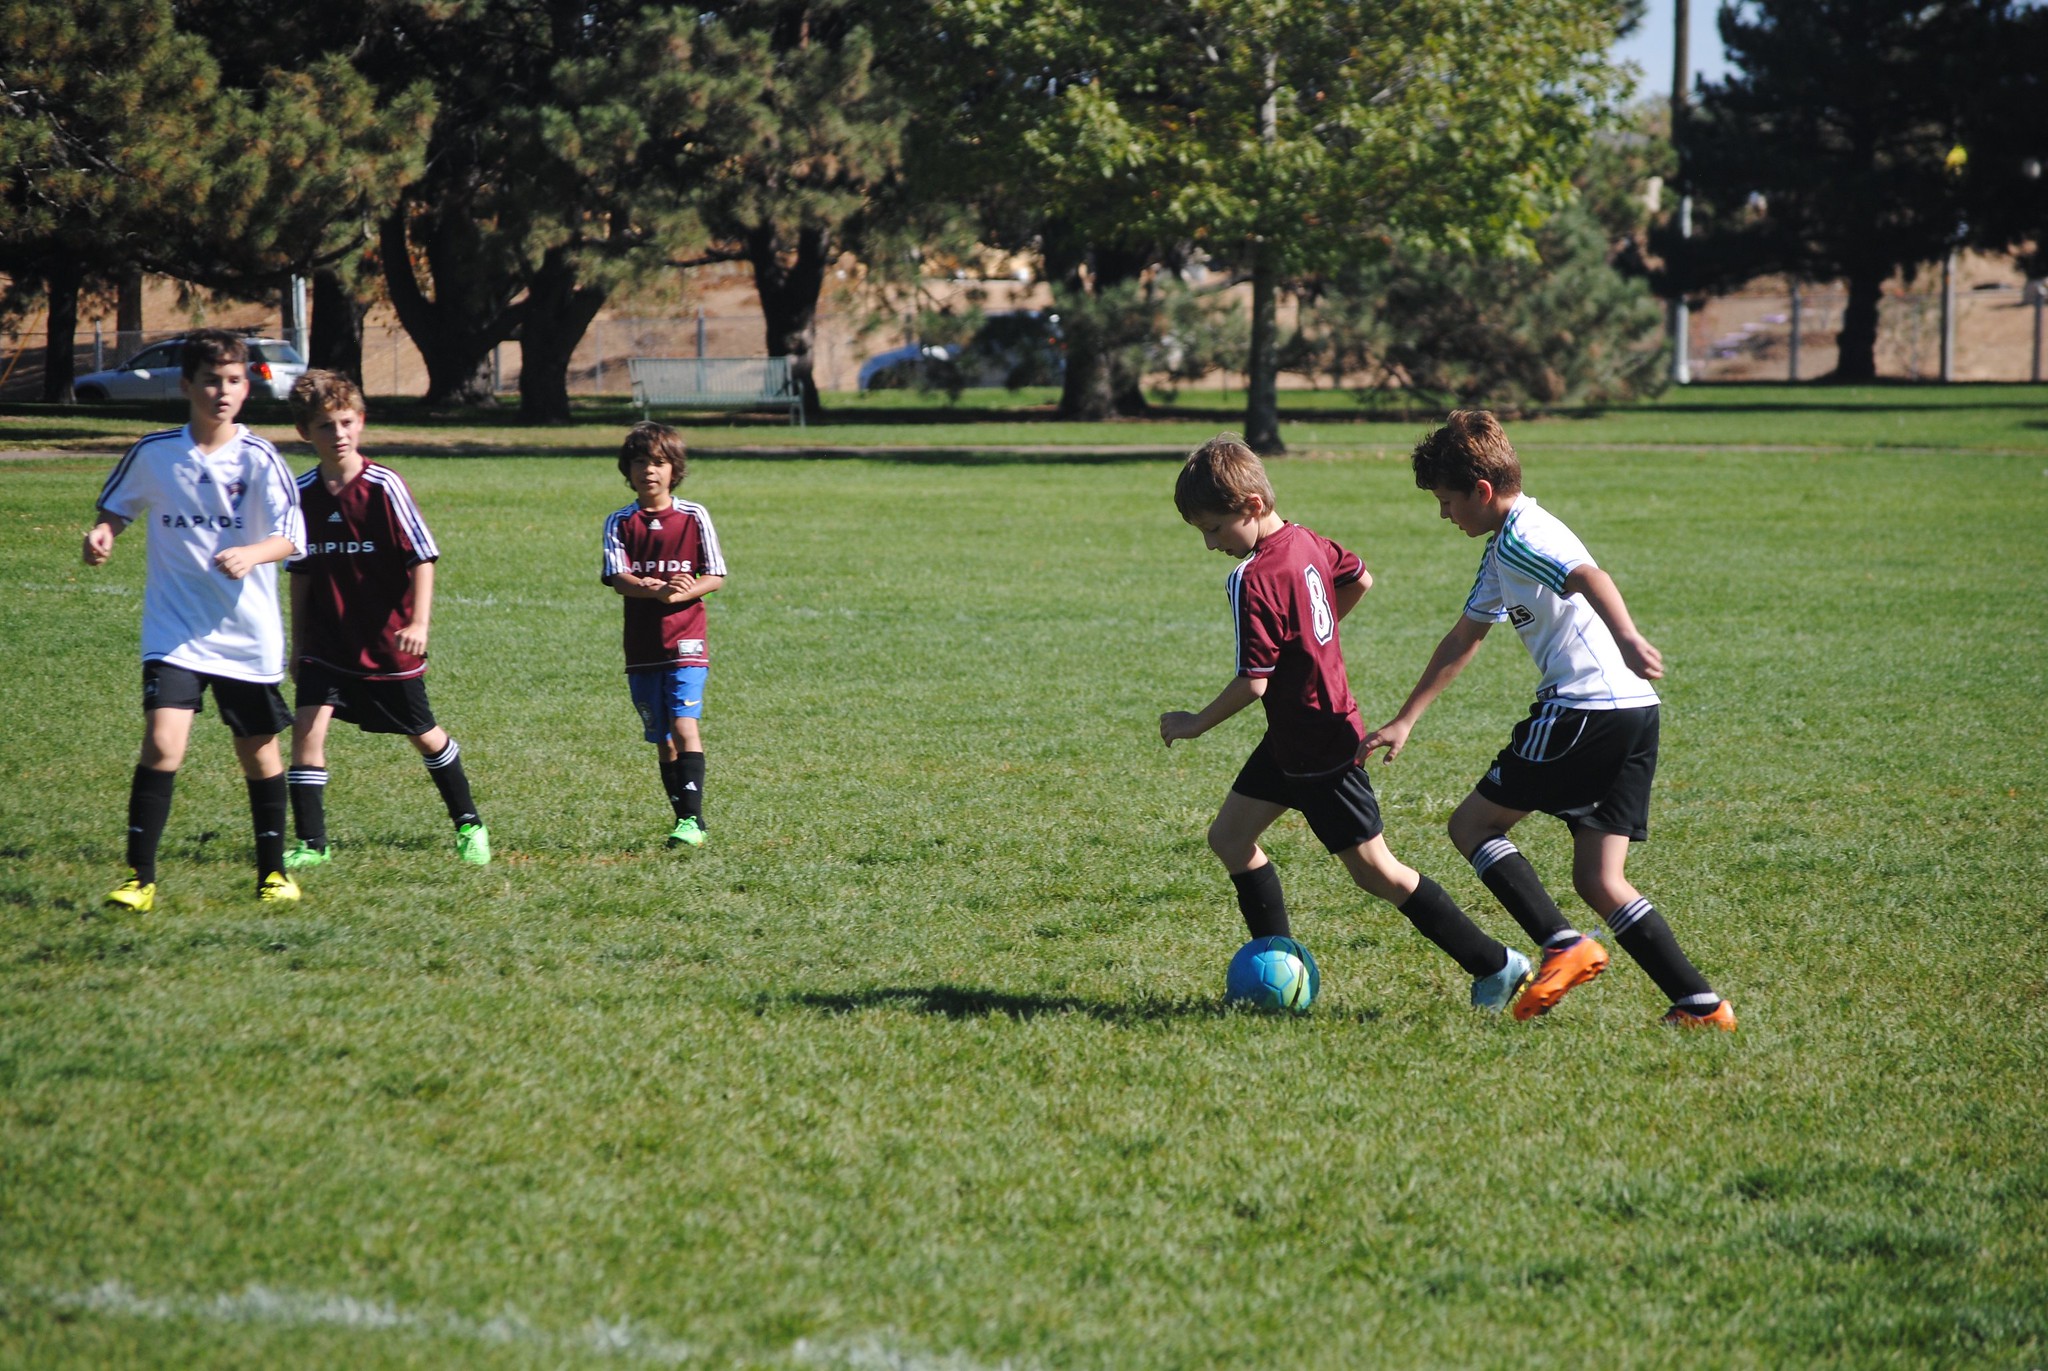 Youth Soccer League